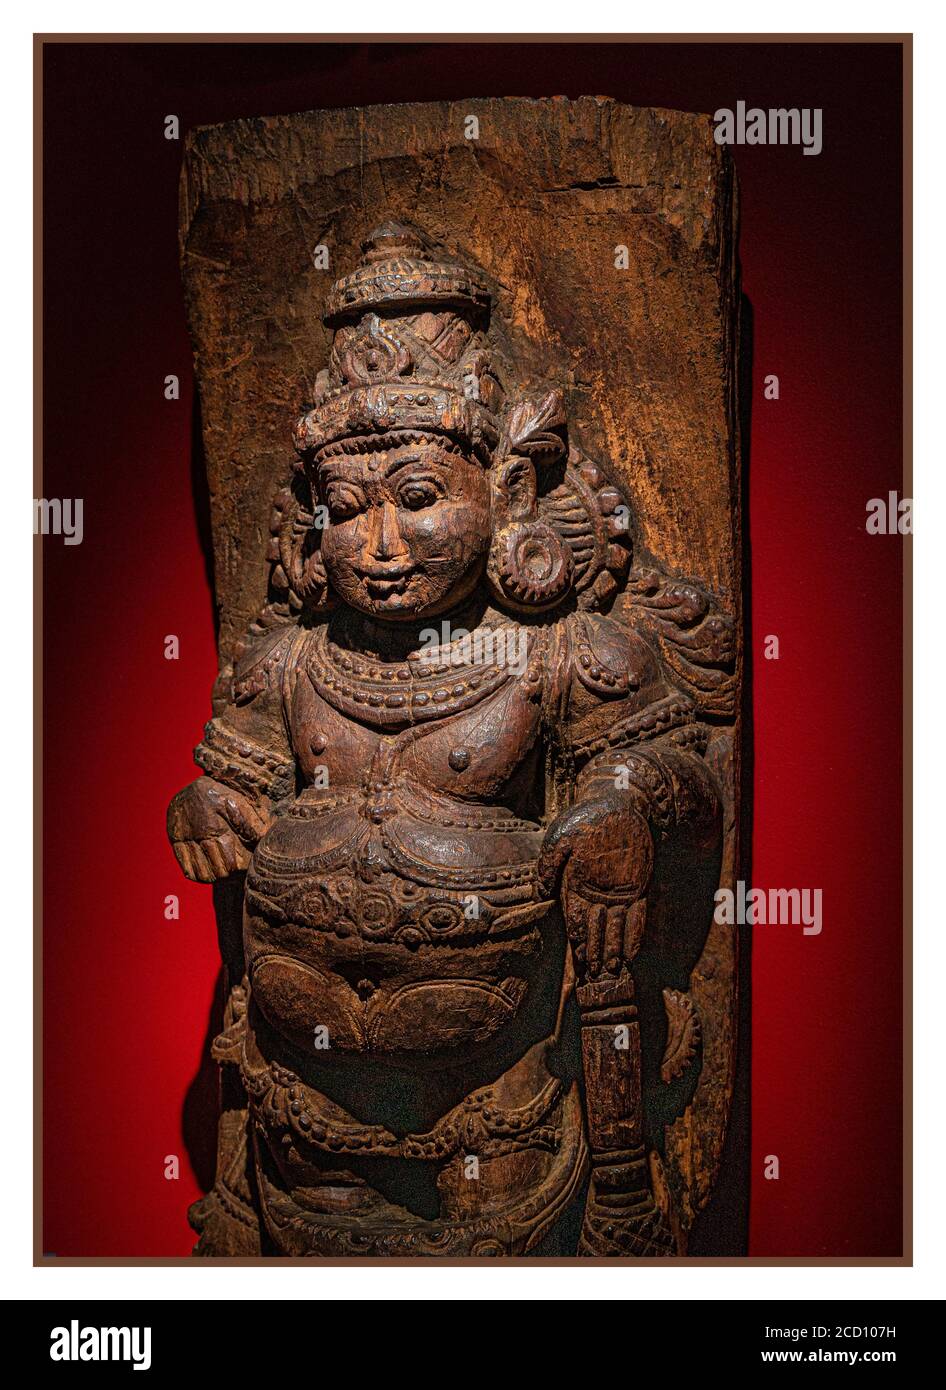 Wooden 19th Century carved statue carving deity from Southern India son of the God Shiva. Also called Kumara a fertility deity symbol where people pray to have descendants. Stock Photo